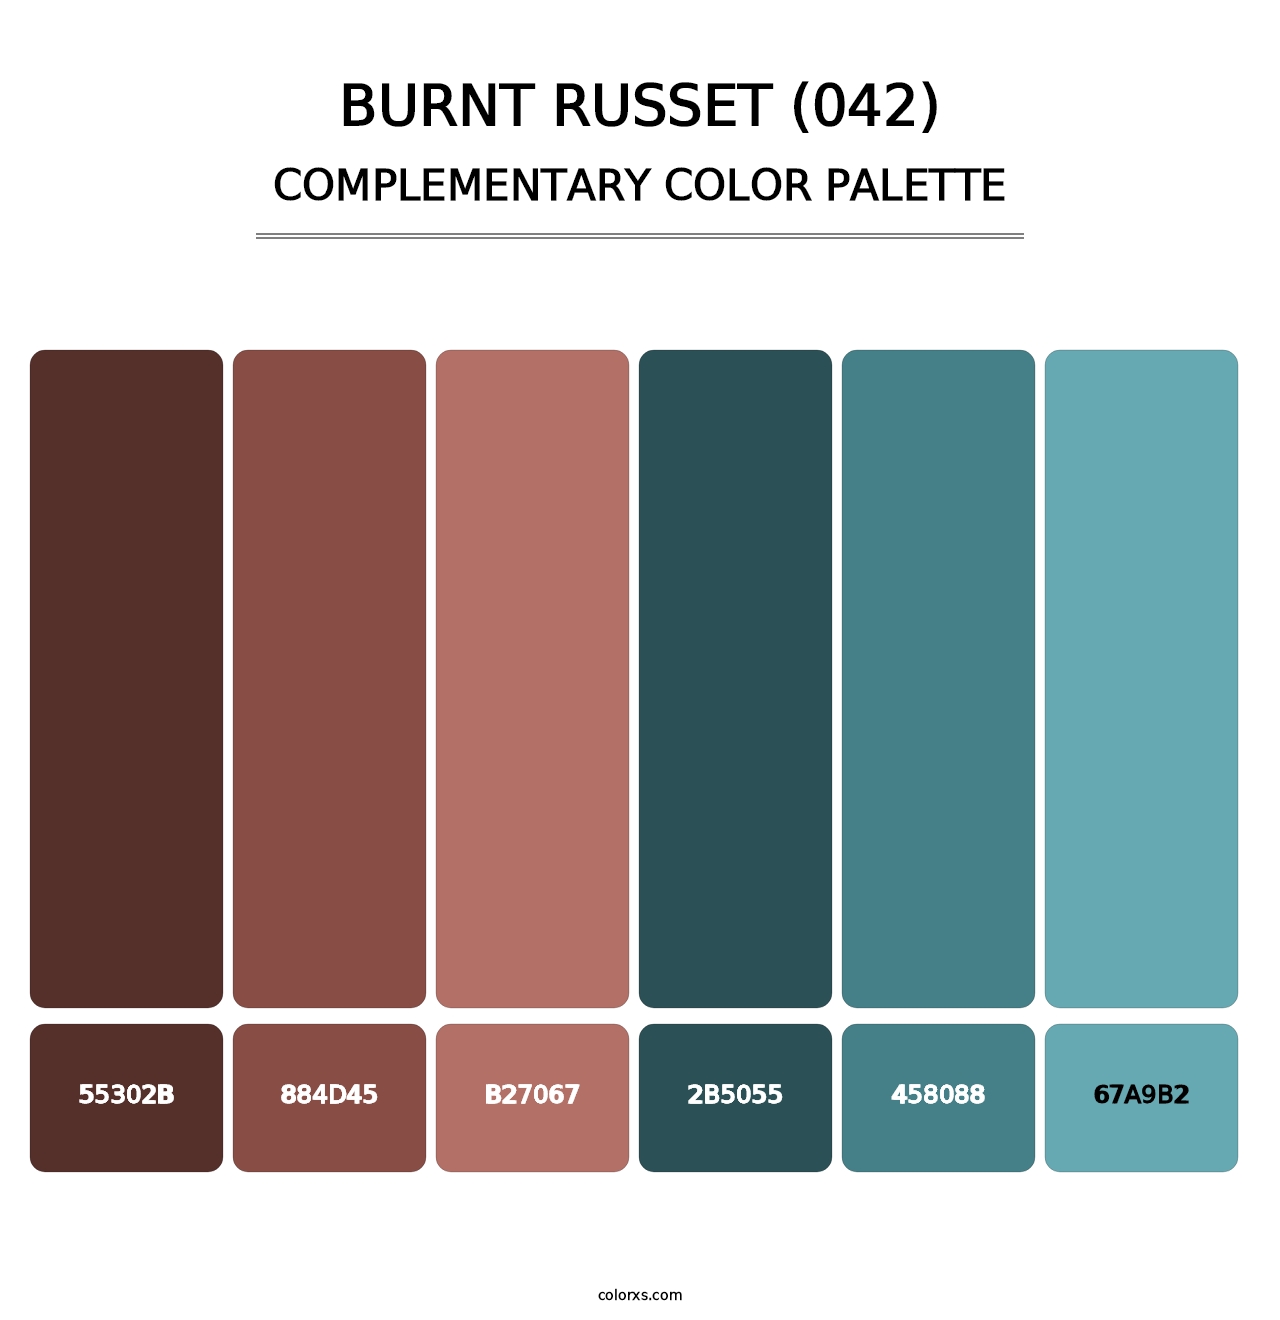 Burnt Russet (042) - Complementary Color Palette